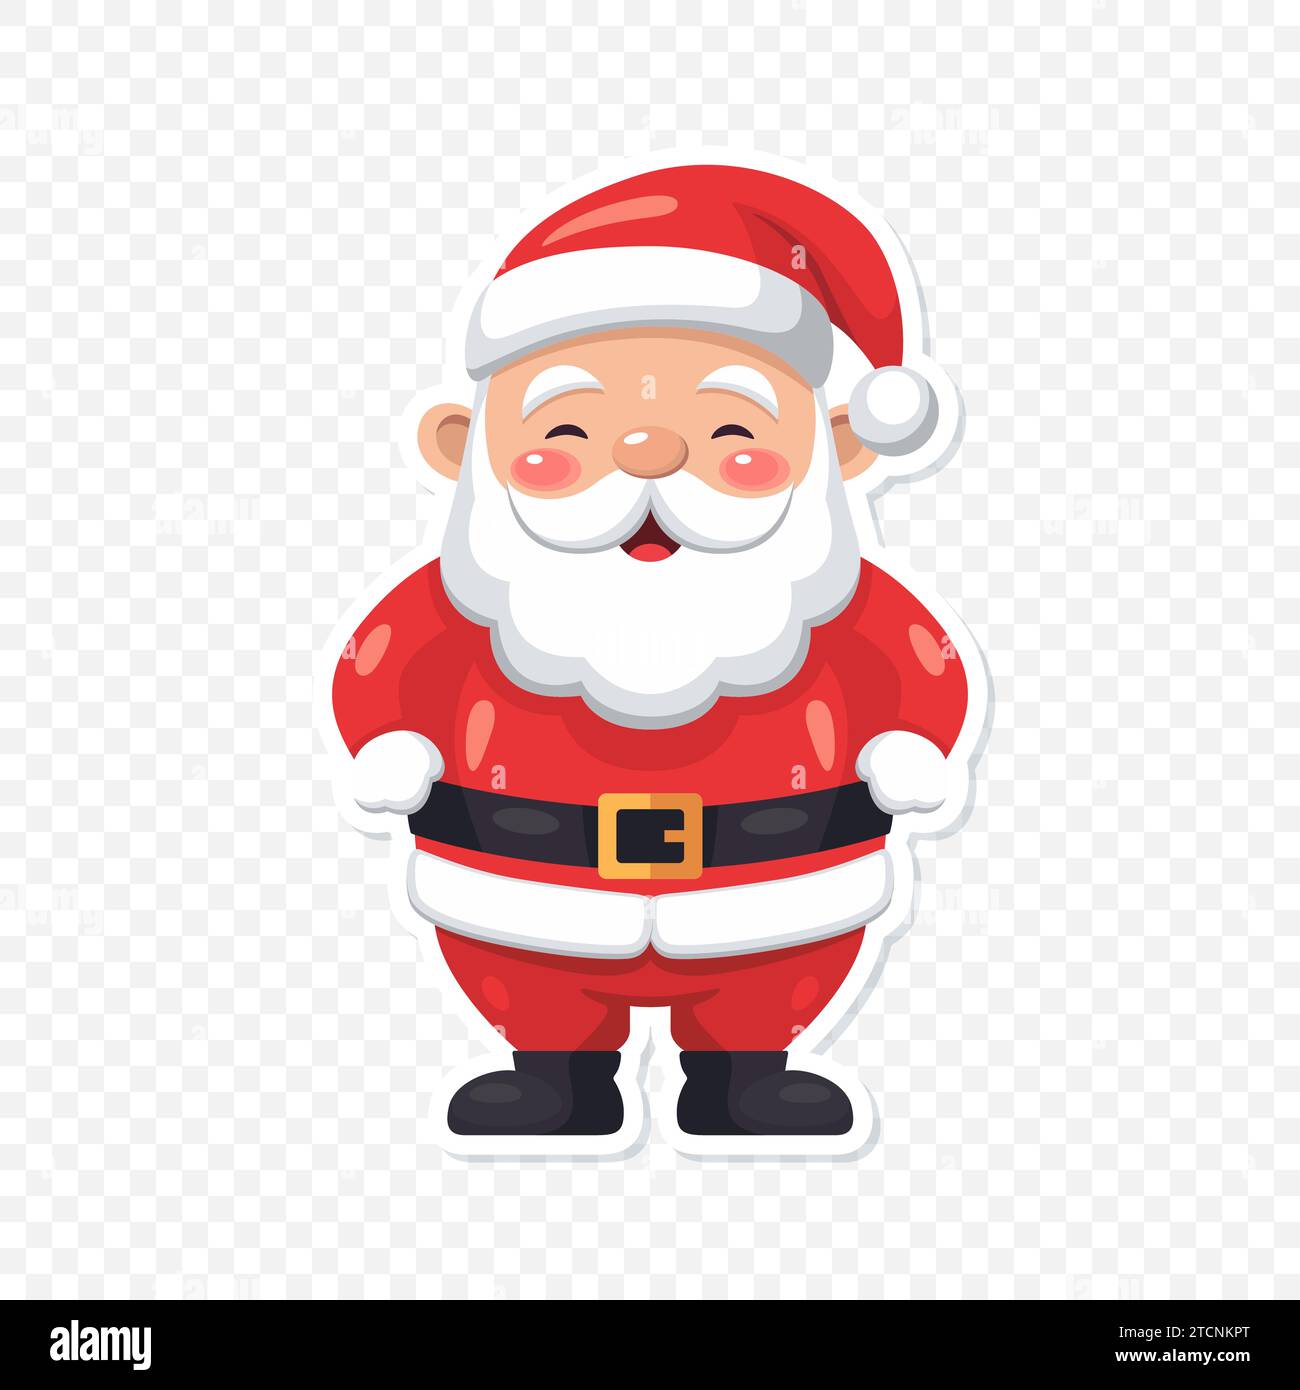 Flat Vector Portrait of Smiling Happy Santa Claus Icon. Cartoon Christmas Santa Claus Sticker Icon, Isolated Vector Illustration, Front View Stock Vector